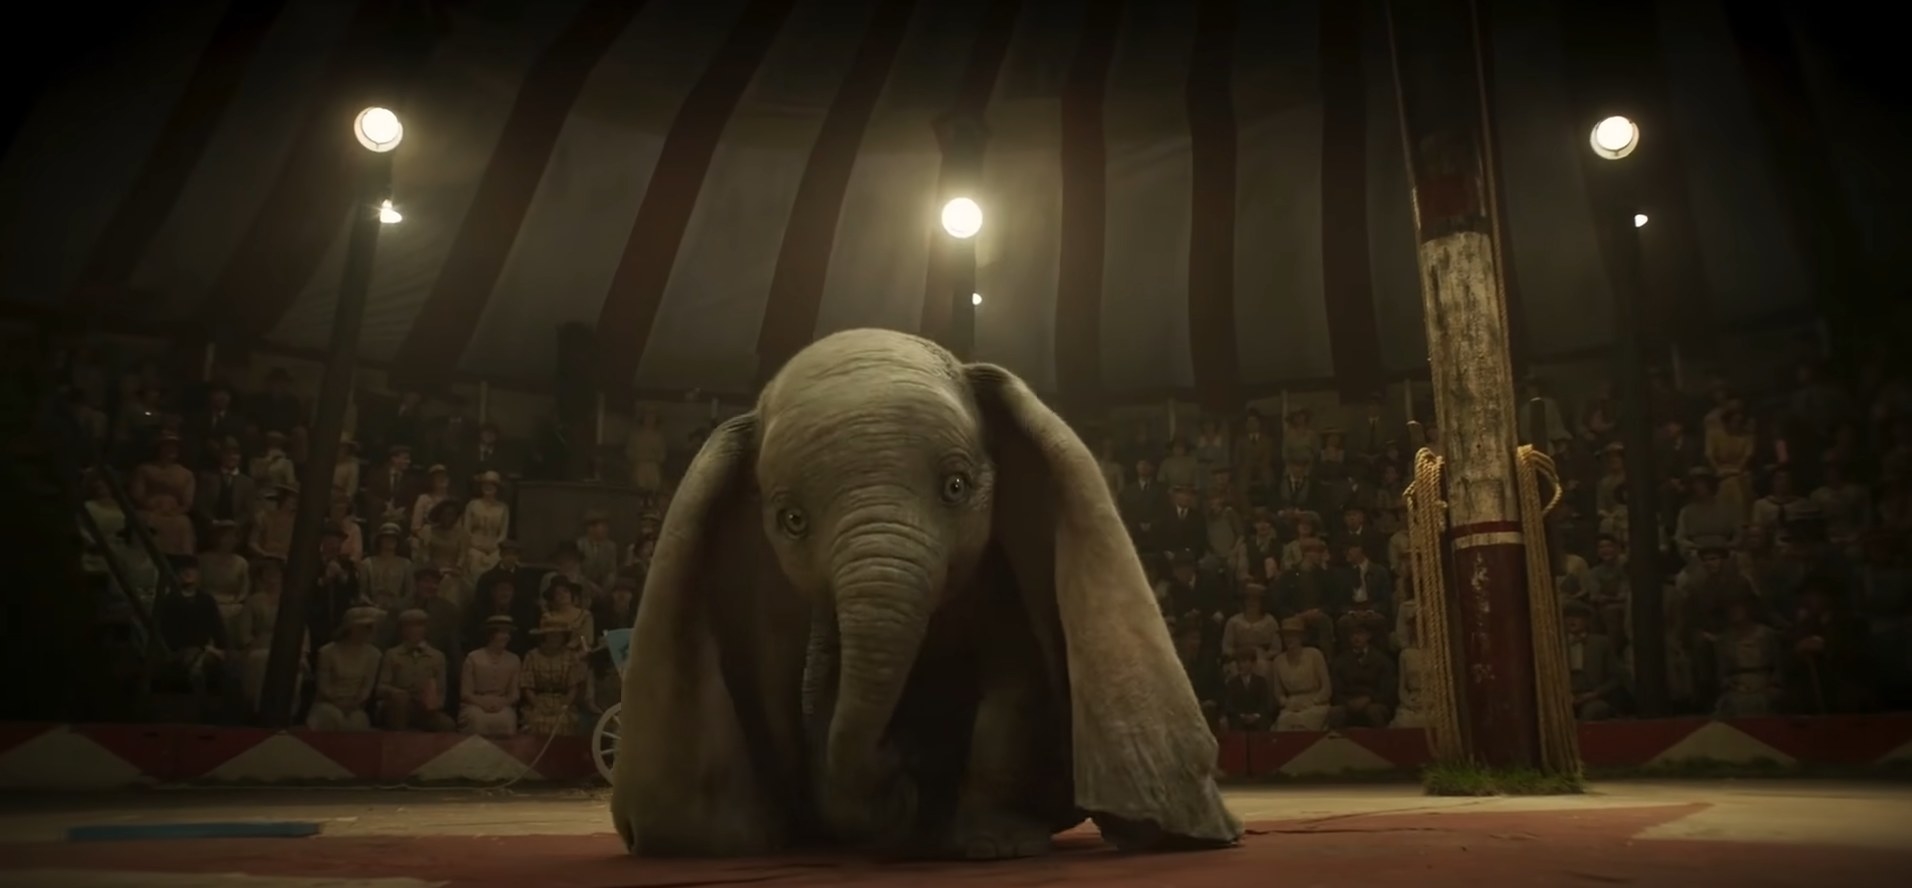 A small elephant with large ears sits in a circus ring under spotlights; audience in the background